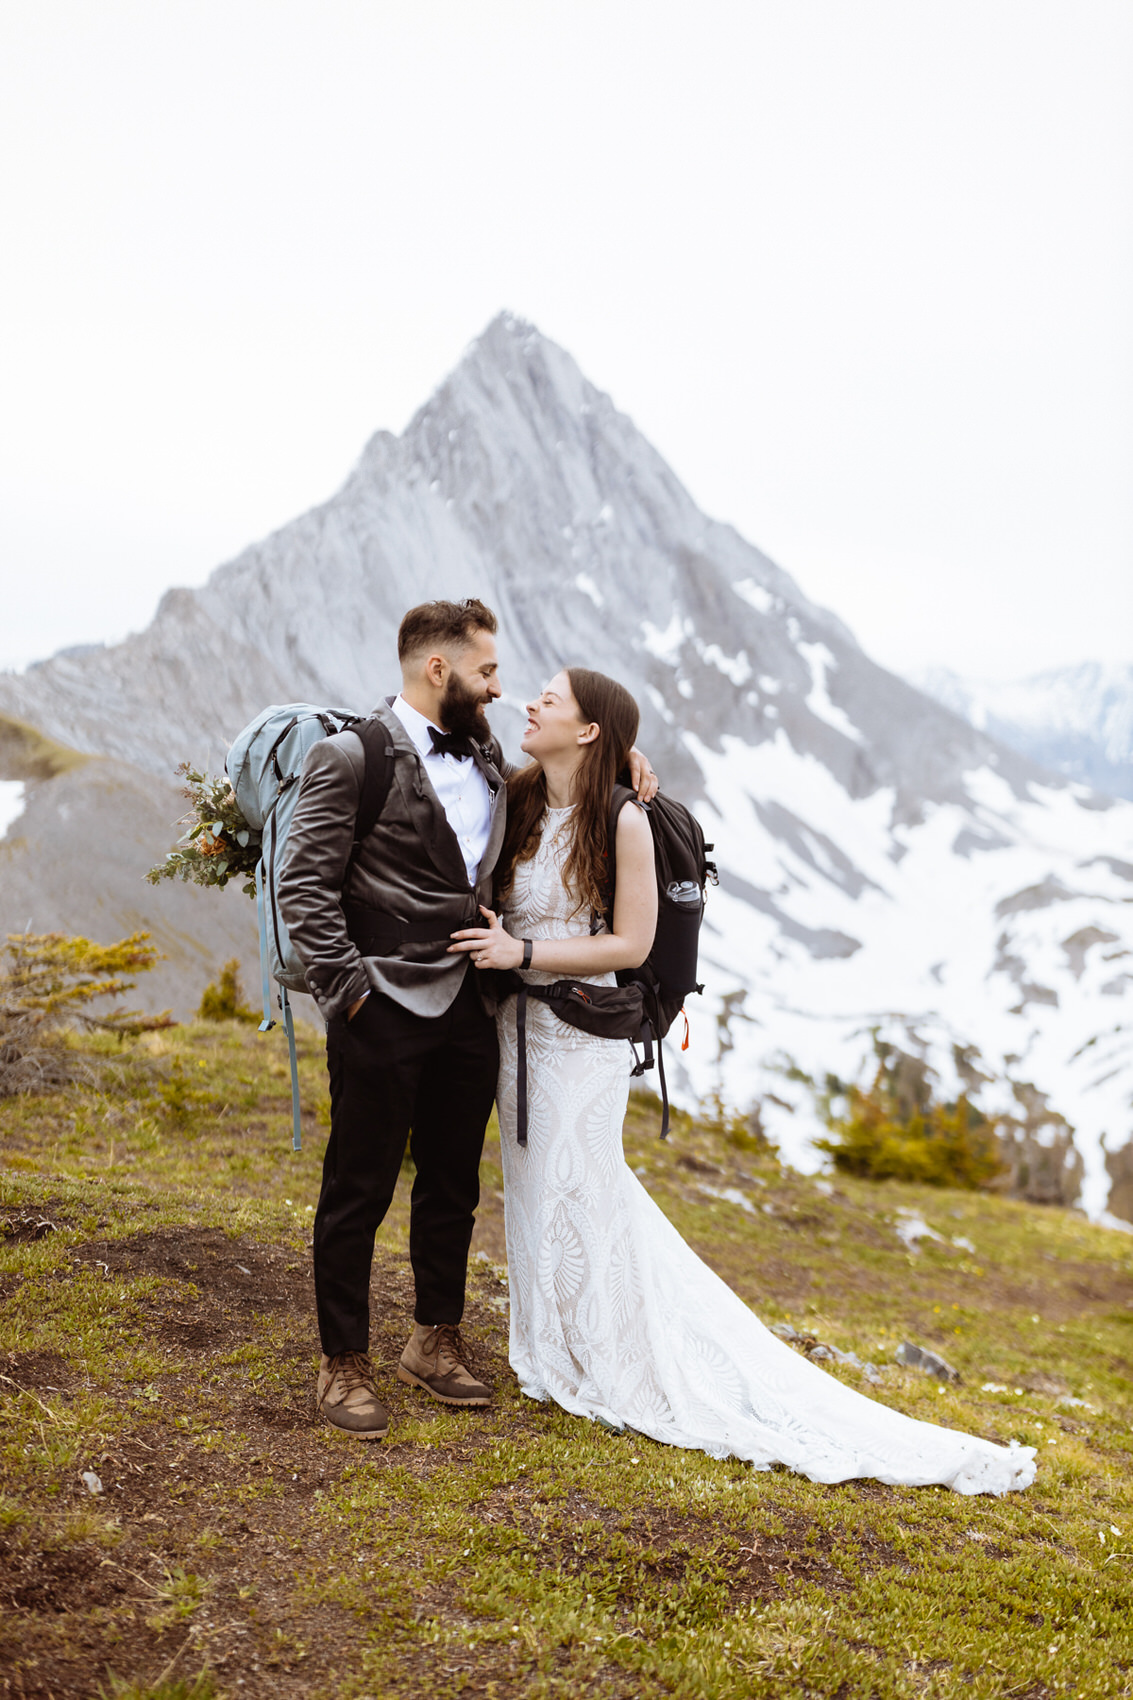 Hiking wedding with floral bouquet in backpacks